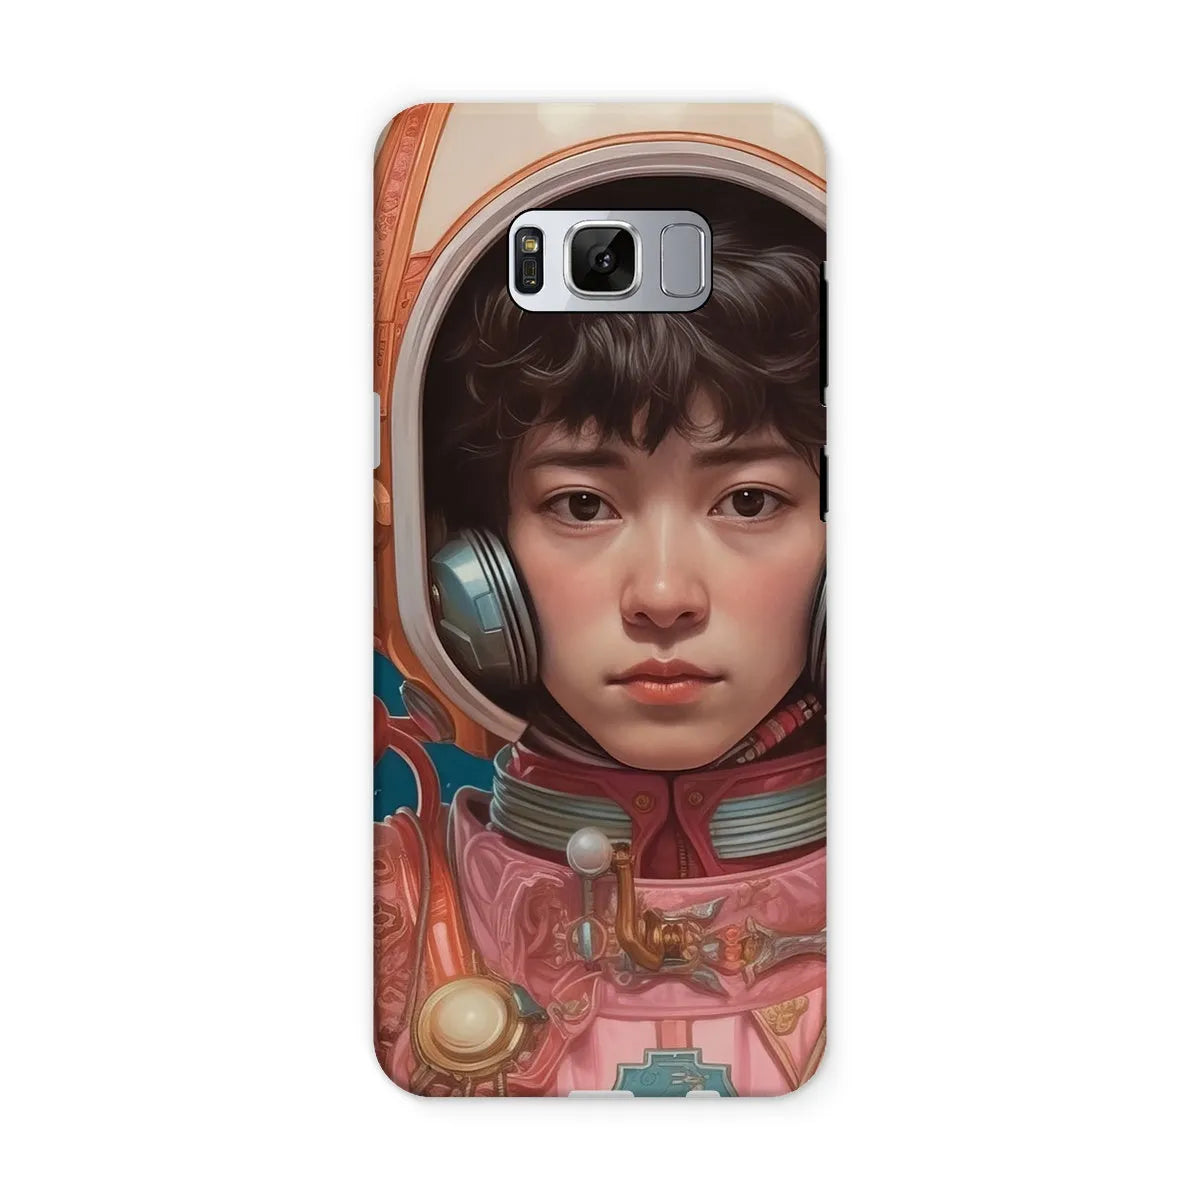 Kaito The Gay Astronaut - Lgbtq Art Phone Case - Samsung Galaxy S8 / Matte - Mobile Phone Cases - Aesthetic Art